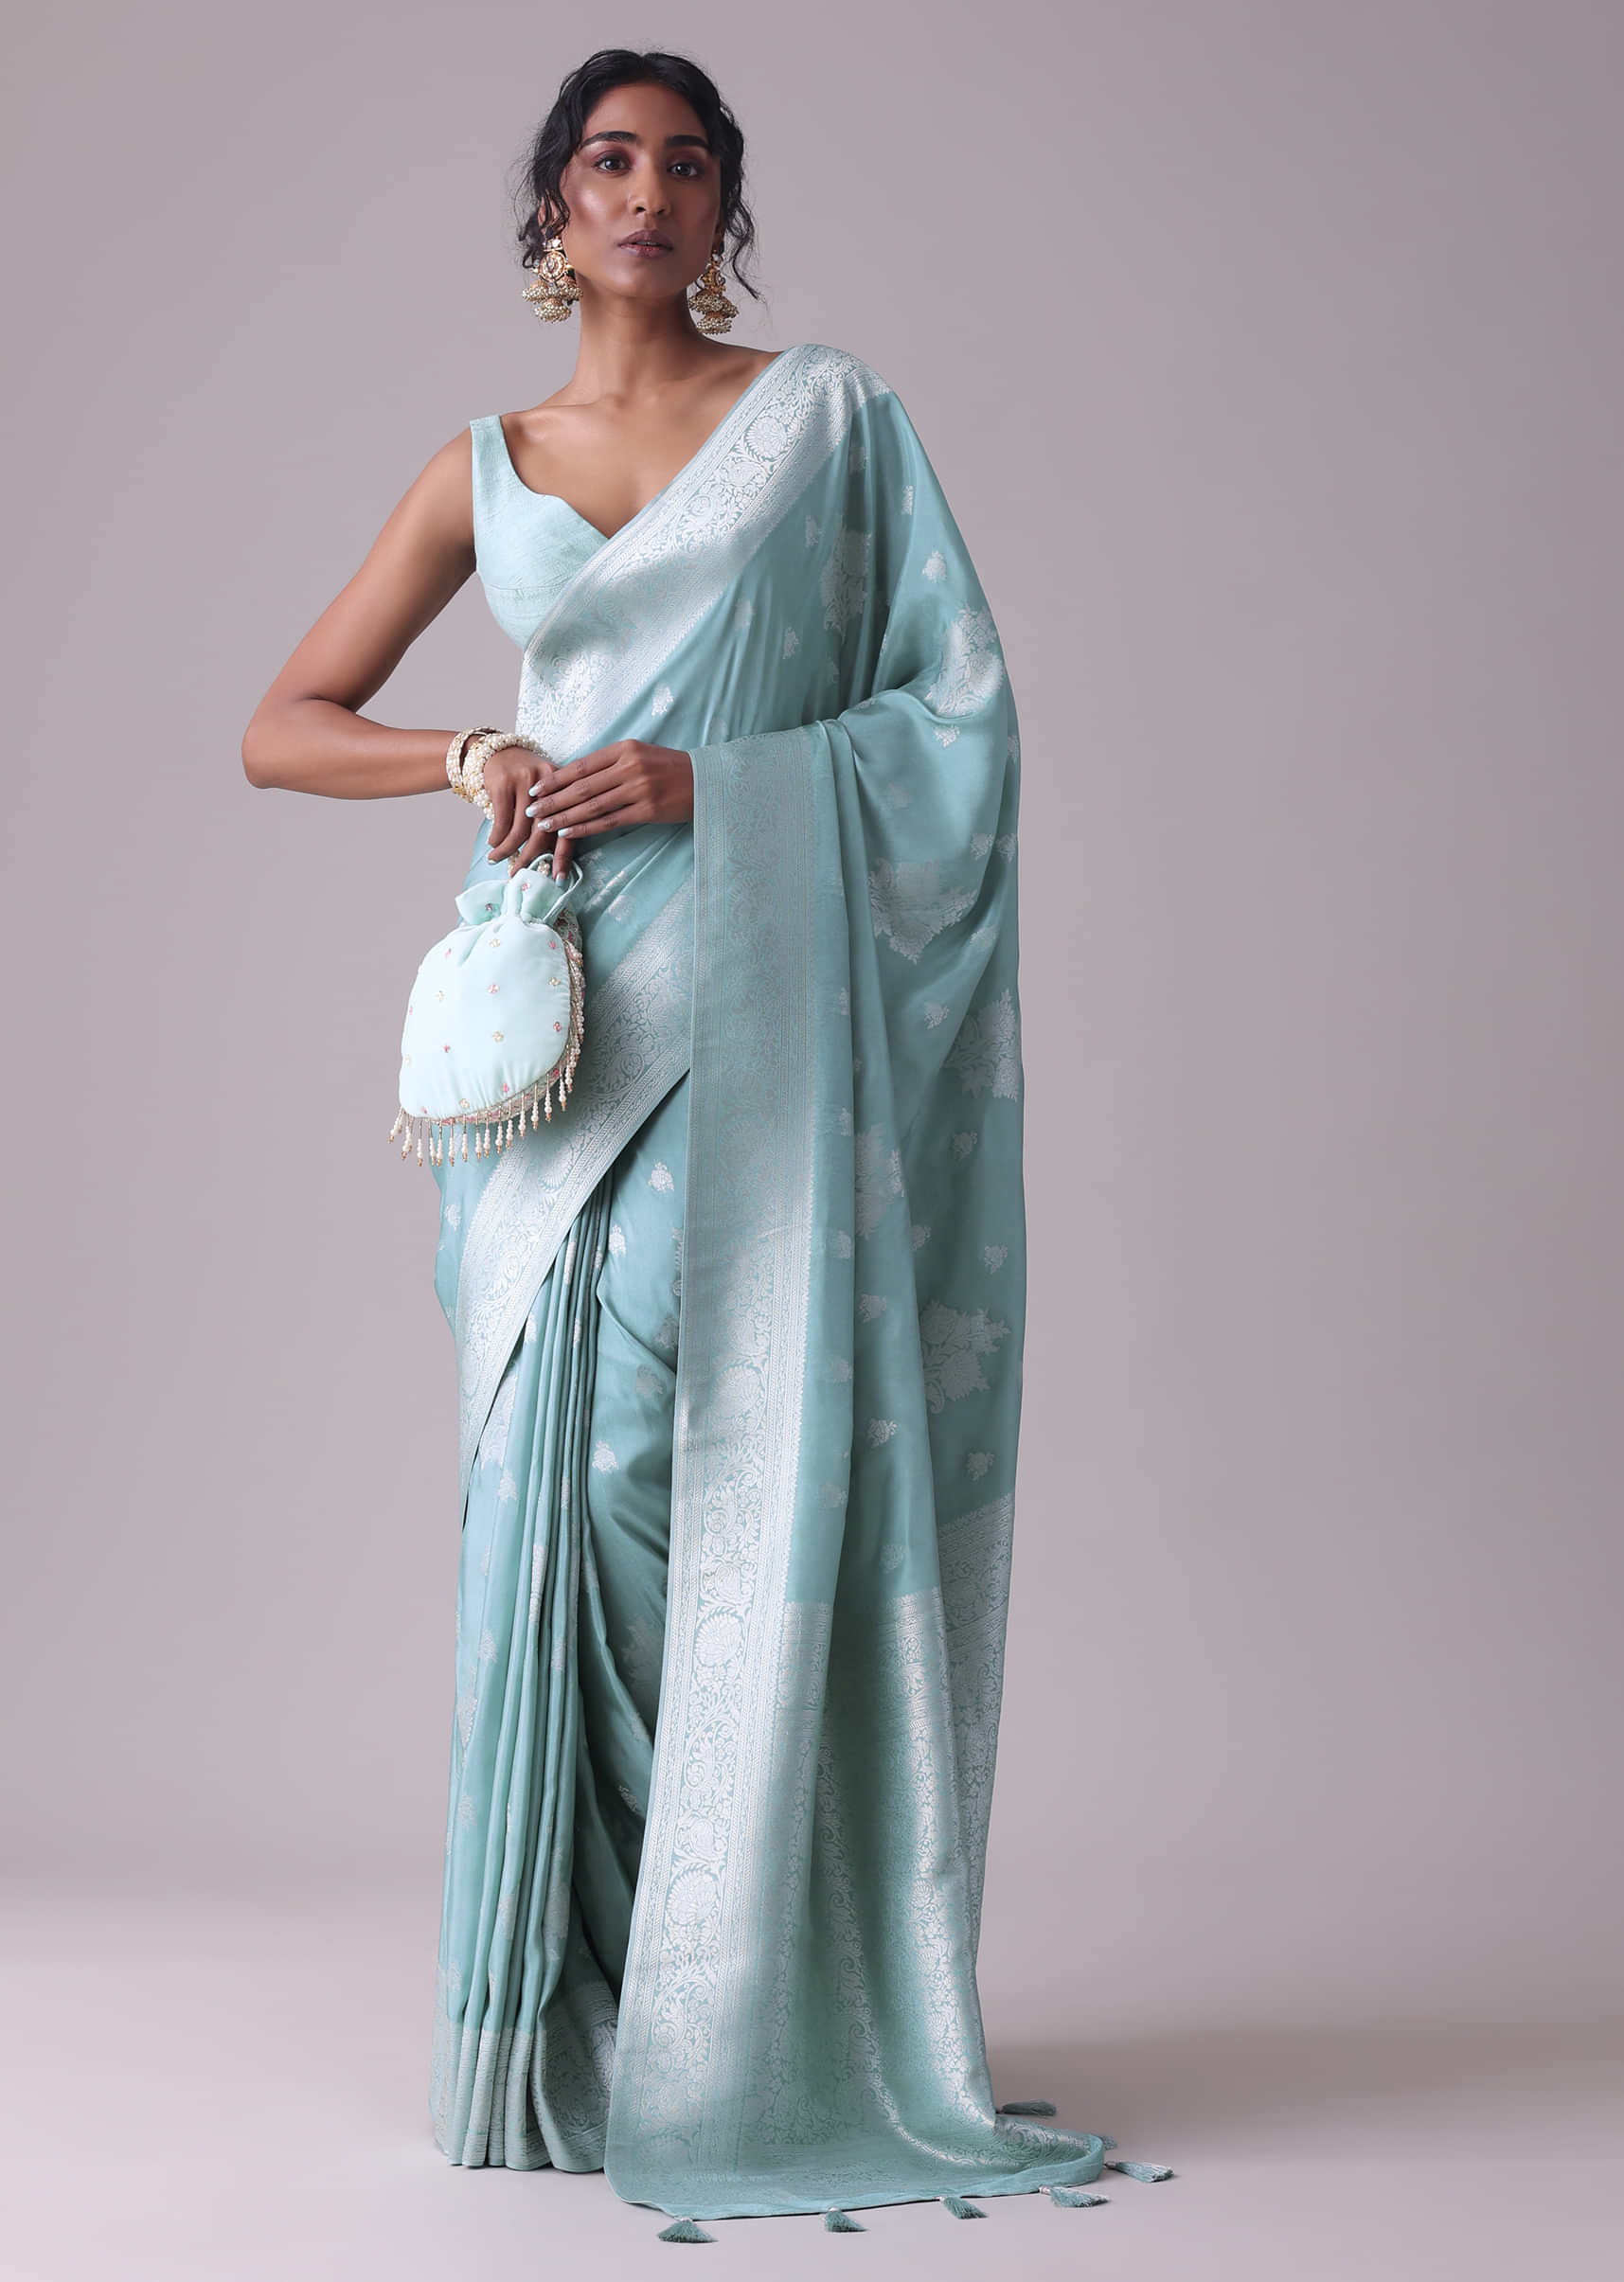 Marine Blue Woven Saree In Dola Silk And Silver Weave